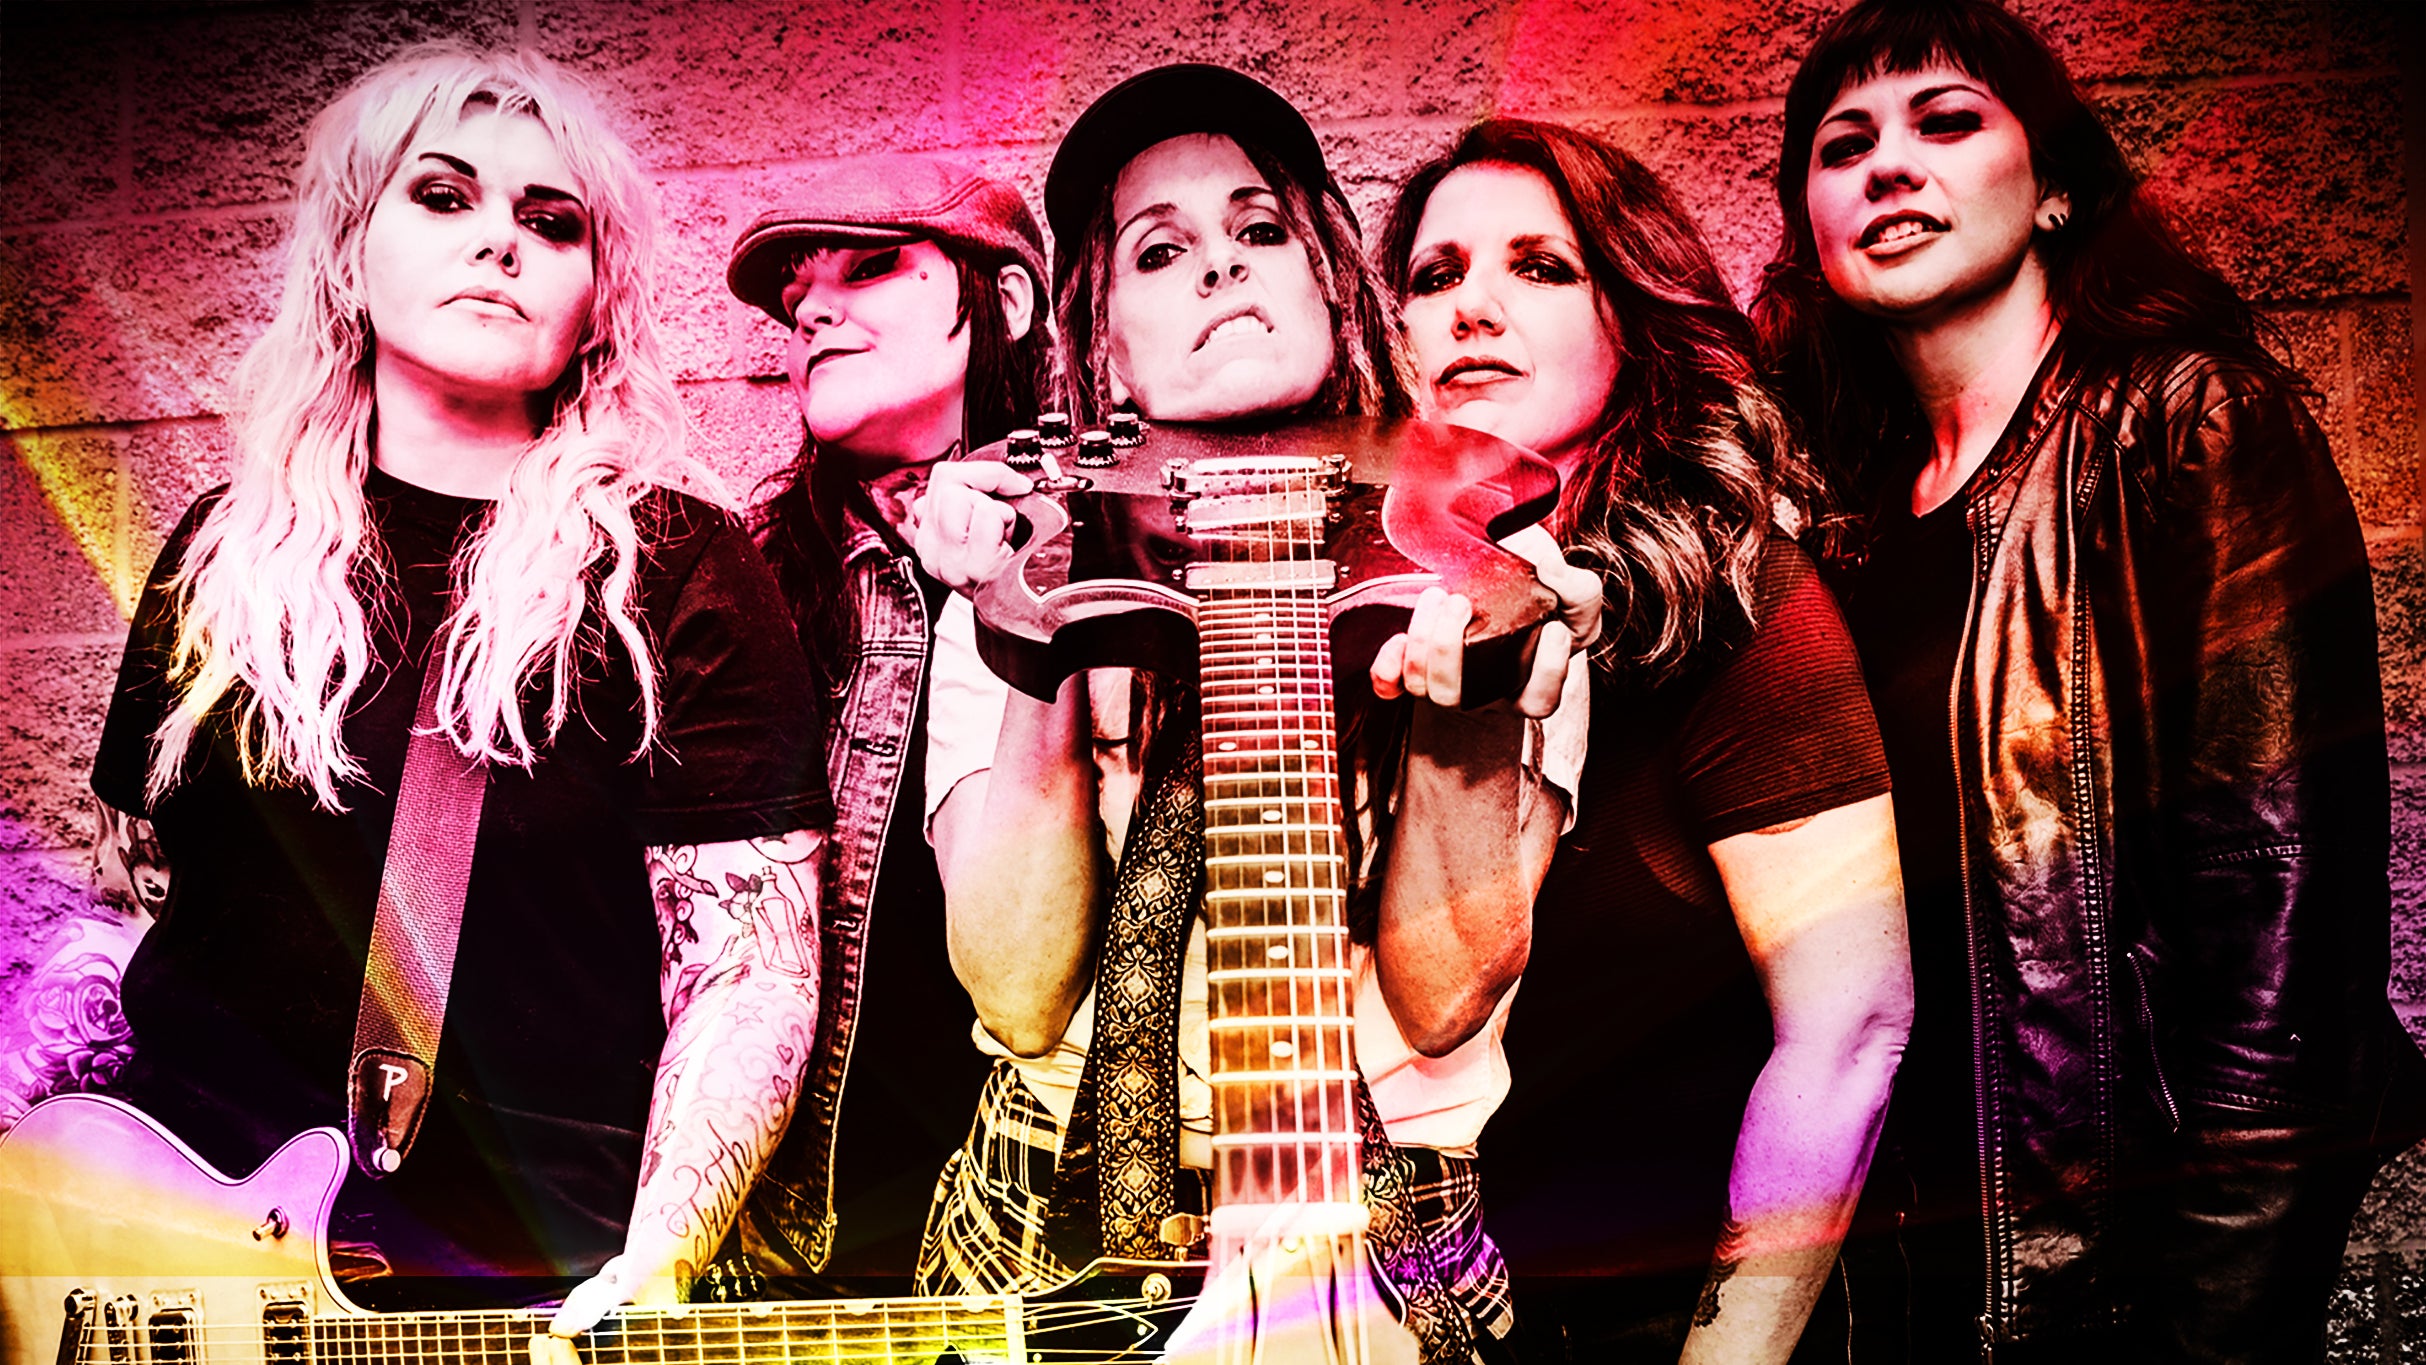 Hell's Belles in Boise promo photo for Day of Show presale offer code